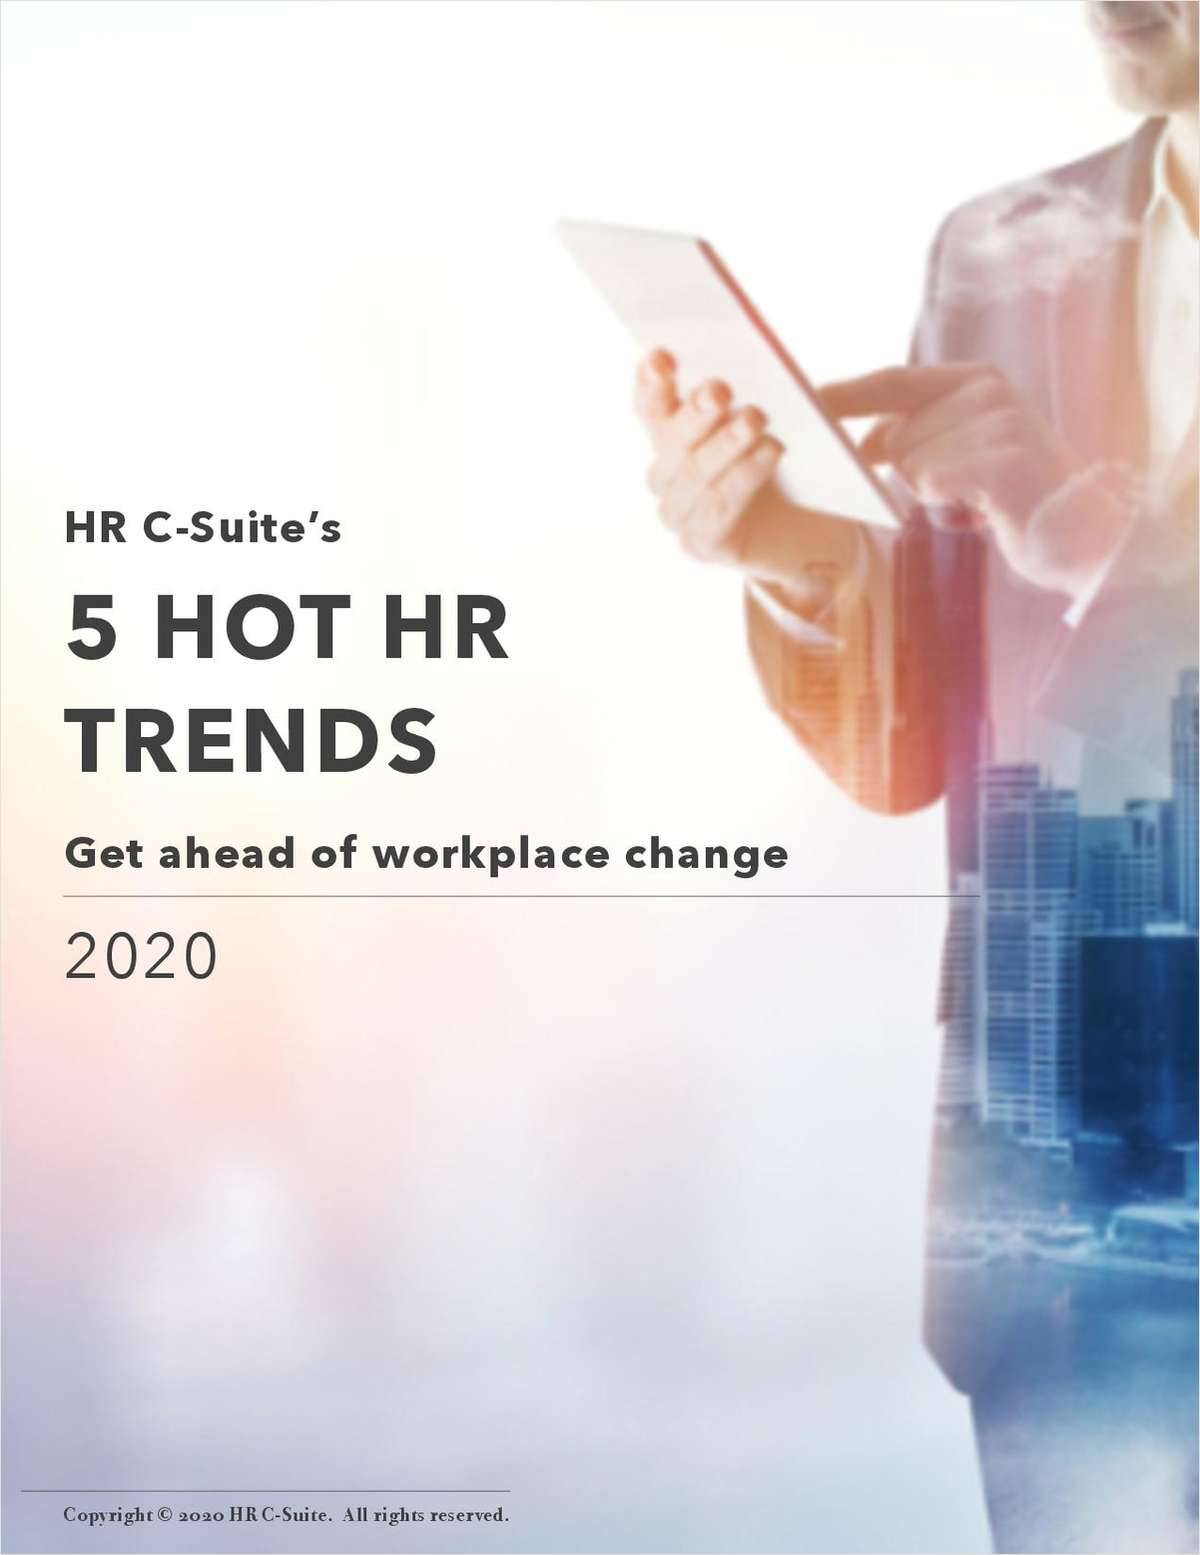 Hot HR Trends for 2020